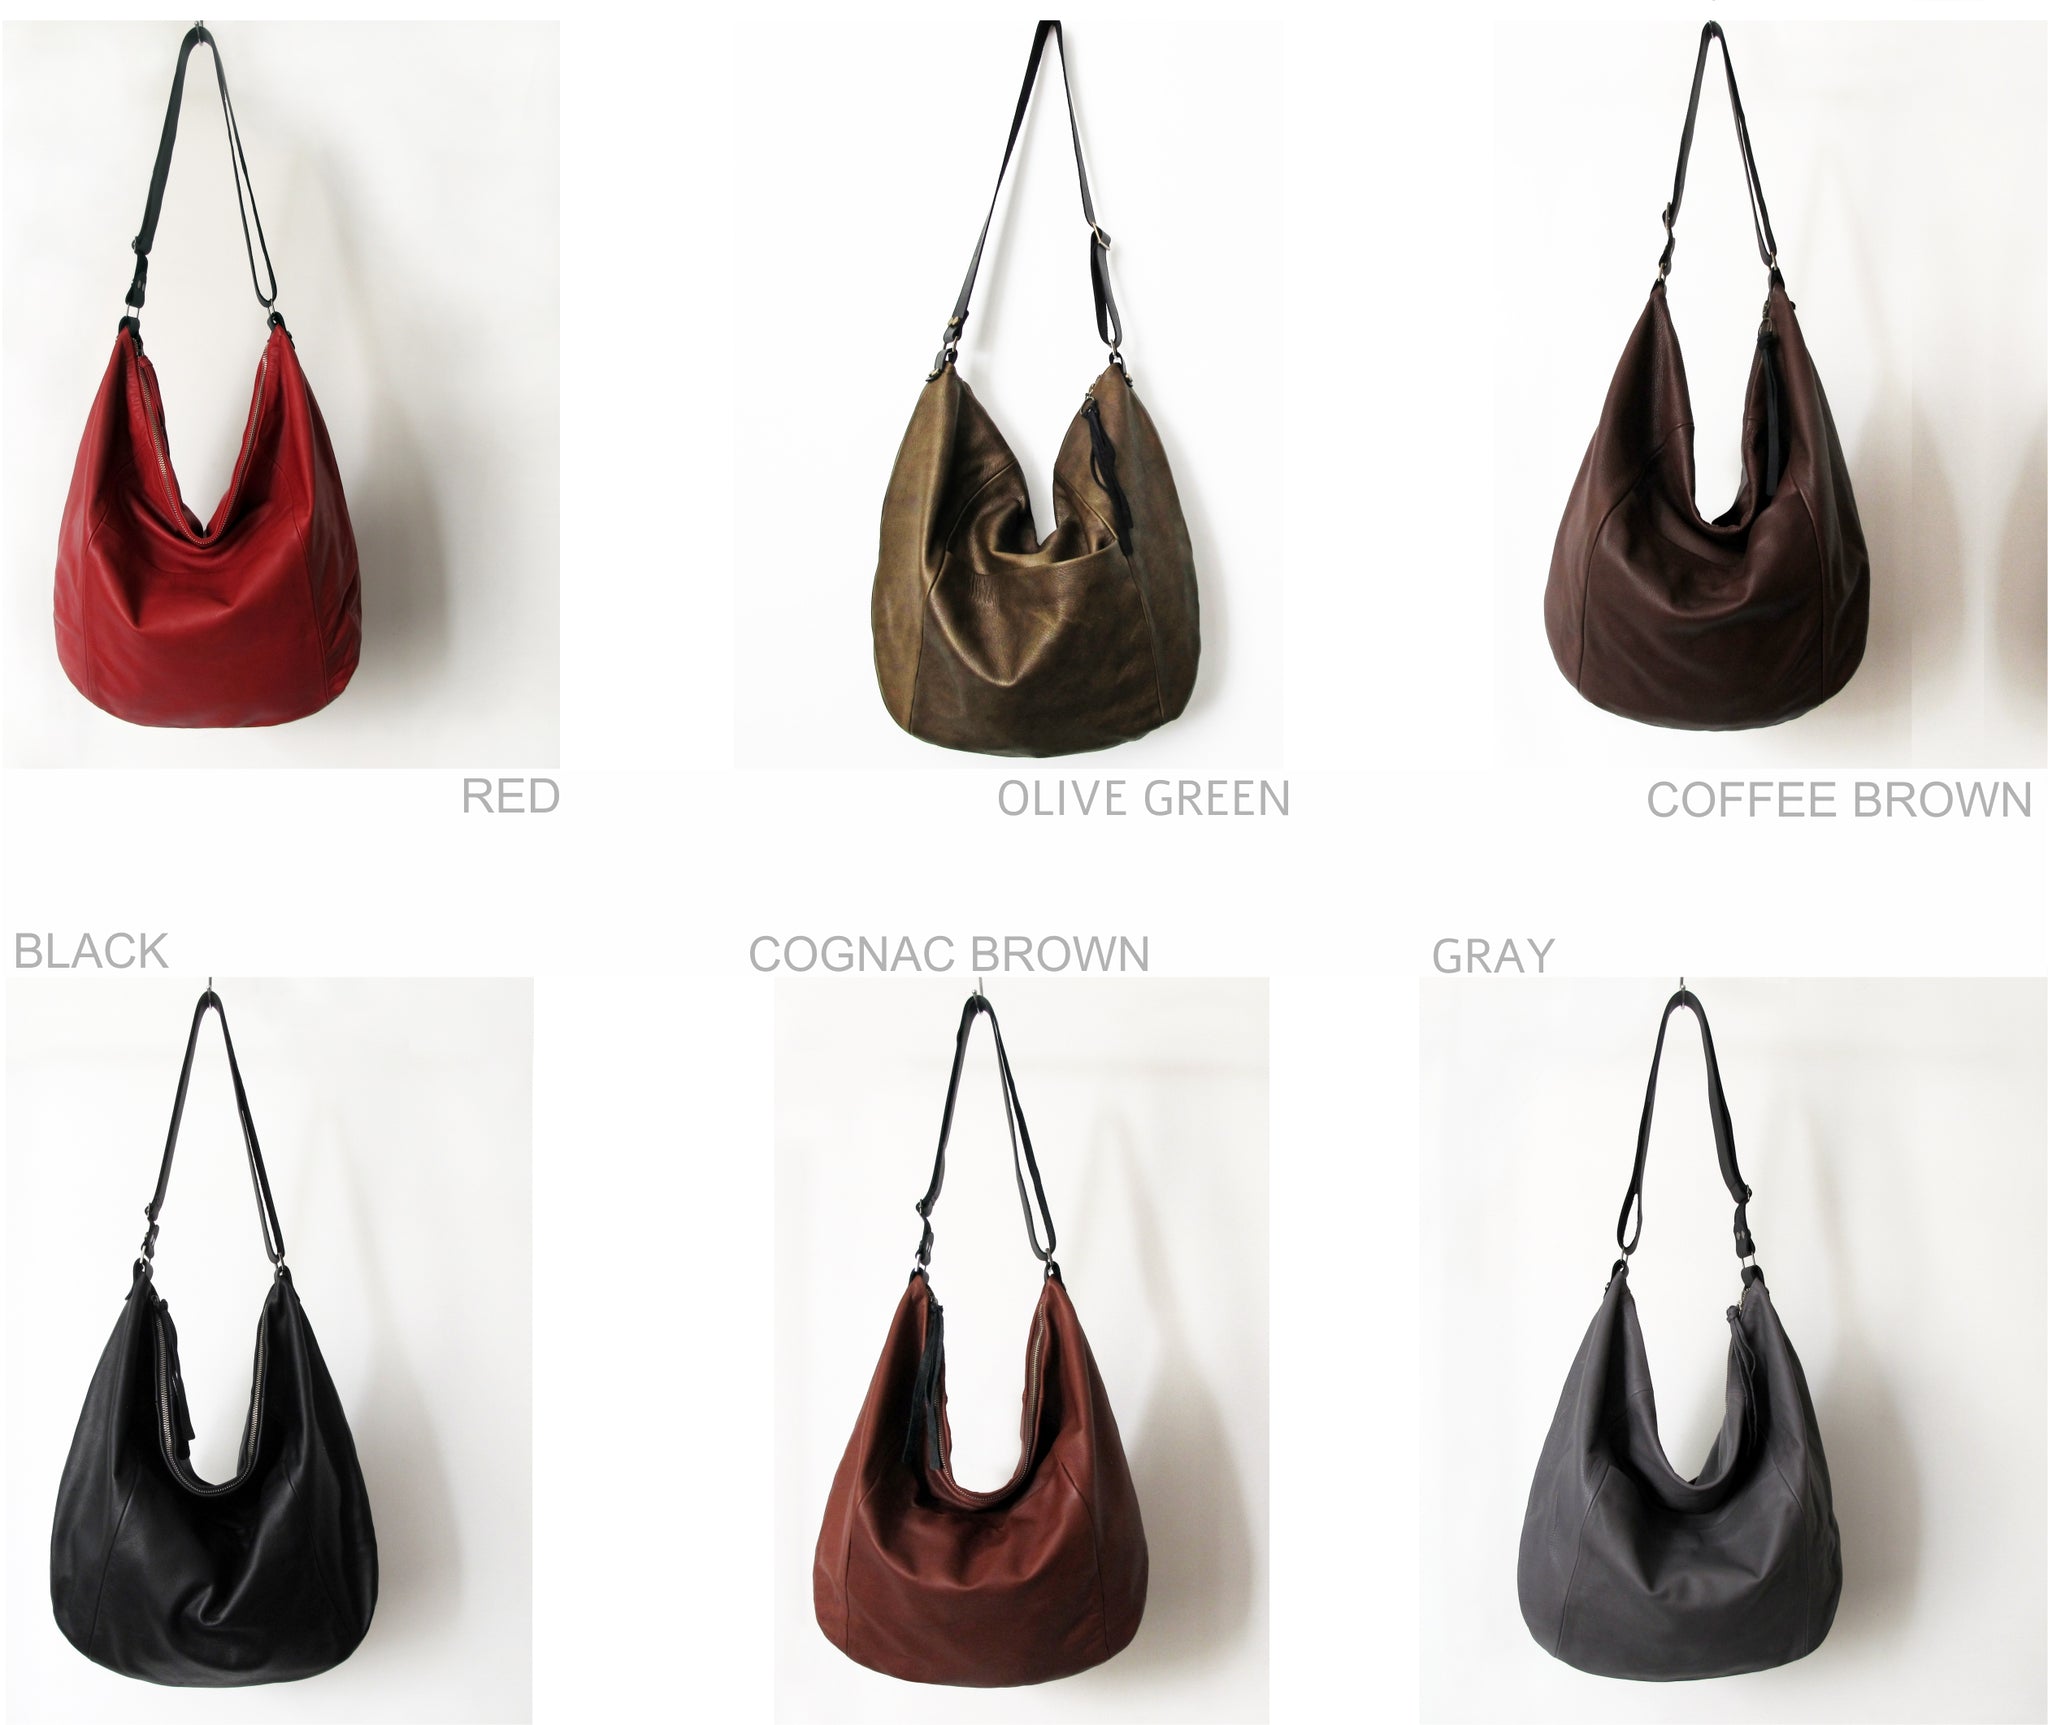 This leather hobo bag is handmade with soft premium quality Italian leather, featuring an adjustable sleek matte black leather shoulder strap that fits seamlessly with every outfit color & style. This large leather bag can be carried crossbody or on the shoulder, showing off it`s beautiful leather drop. Its ideal minimalist design is suitable for long active days & use. Available in black, coffee brown, cognac brown, olive green, gray and red.